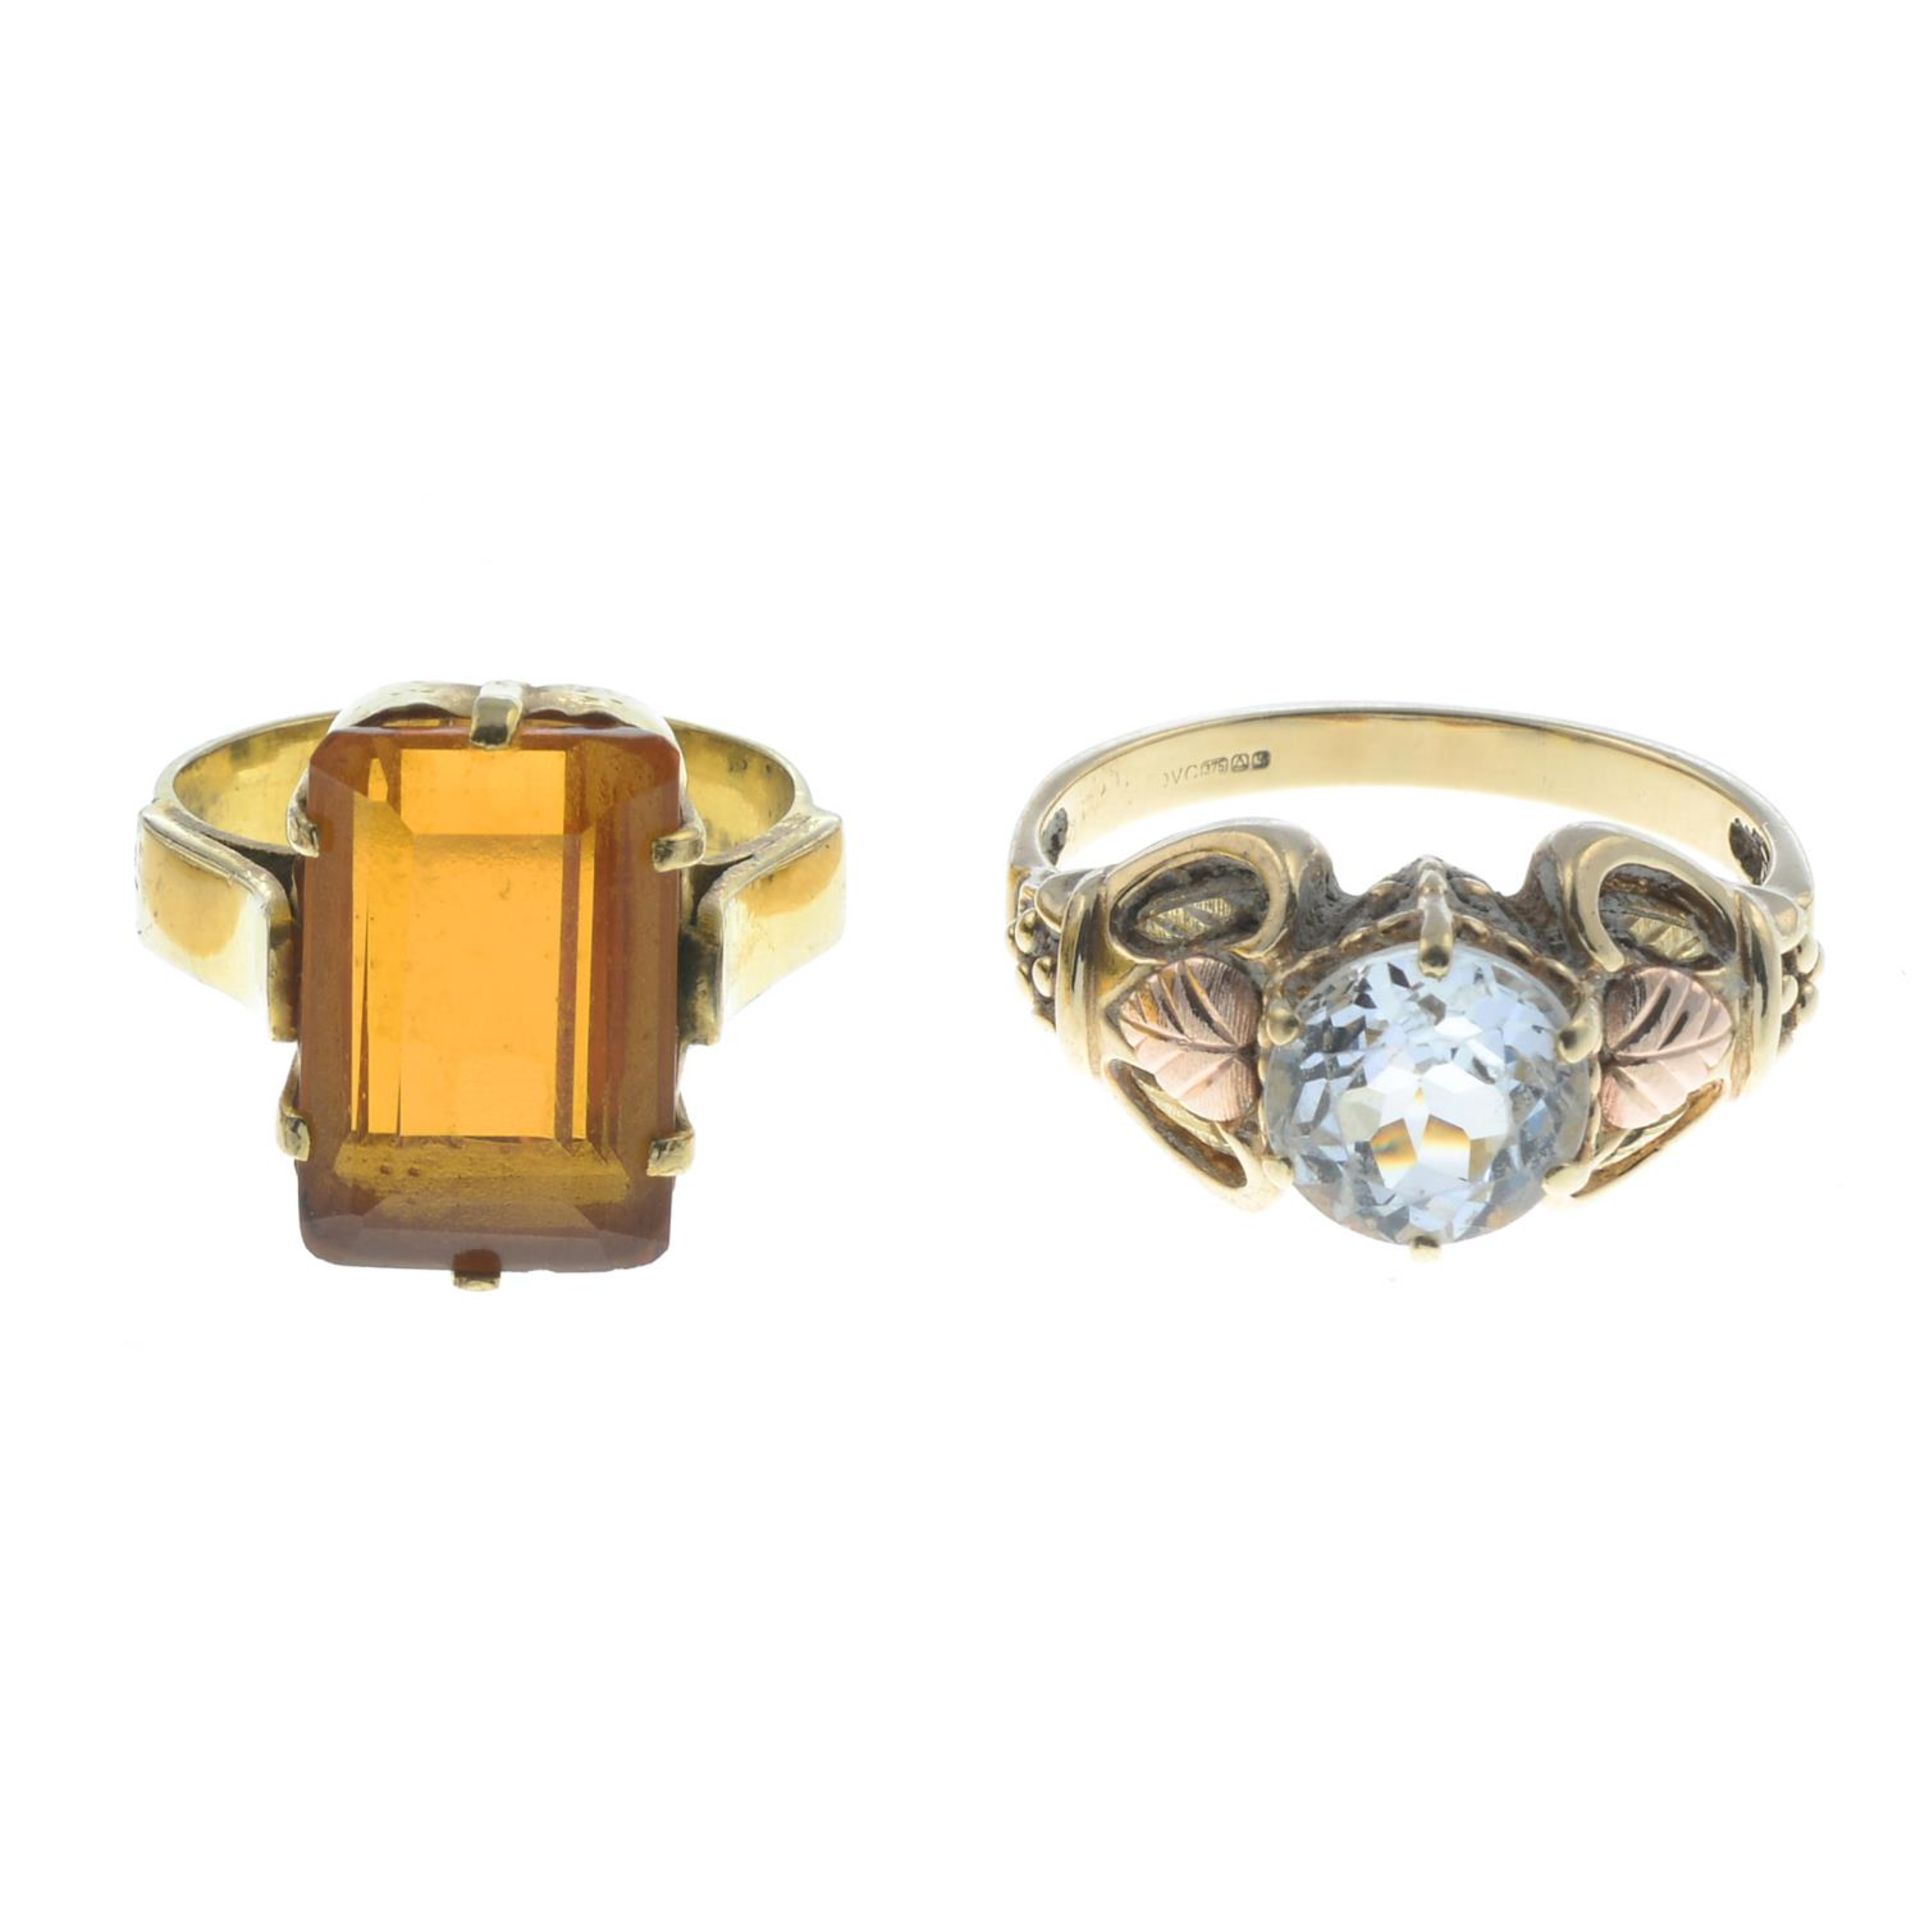 9ct gold cubic zirconia ring, hallmarks for 9ct gold, ring size R, 5.2gms.